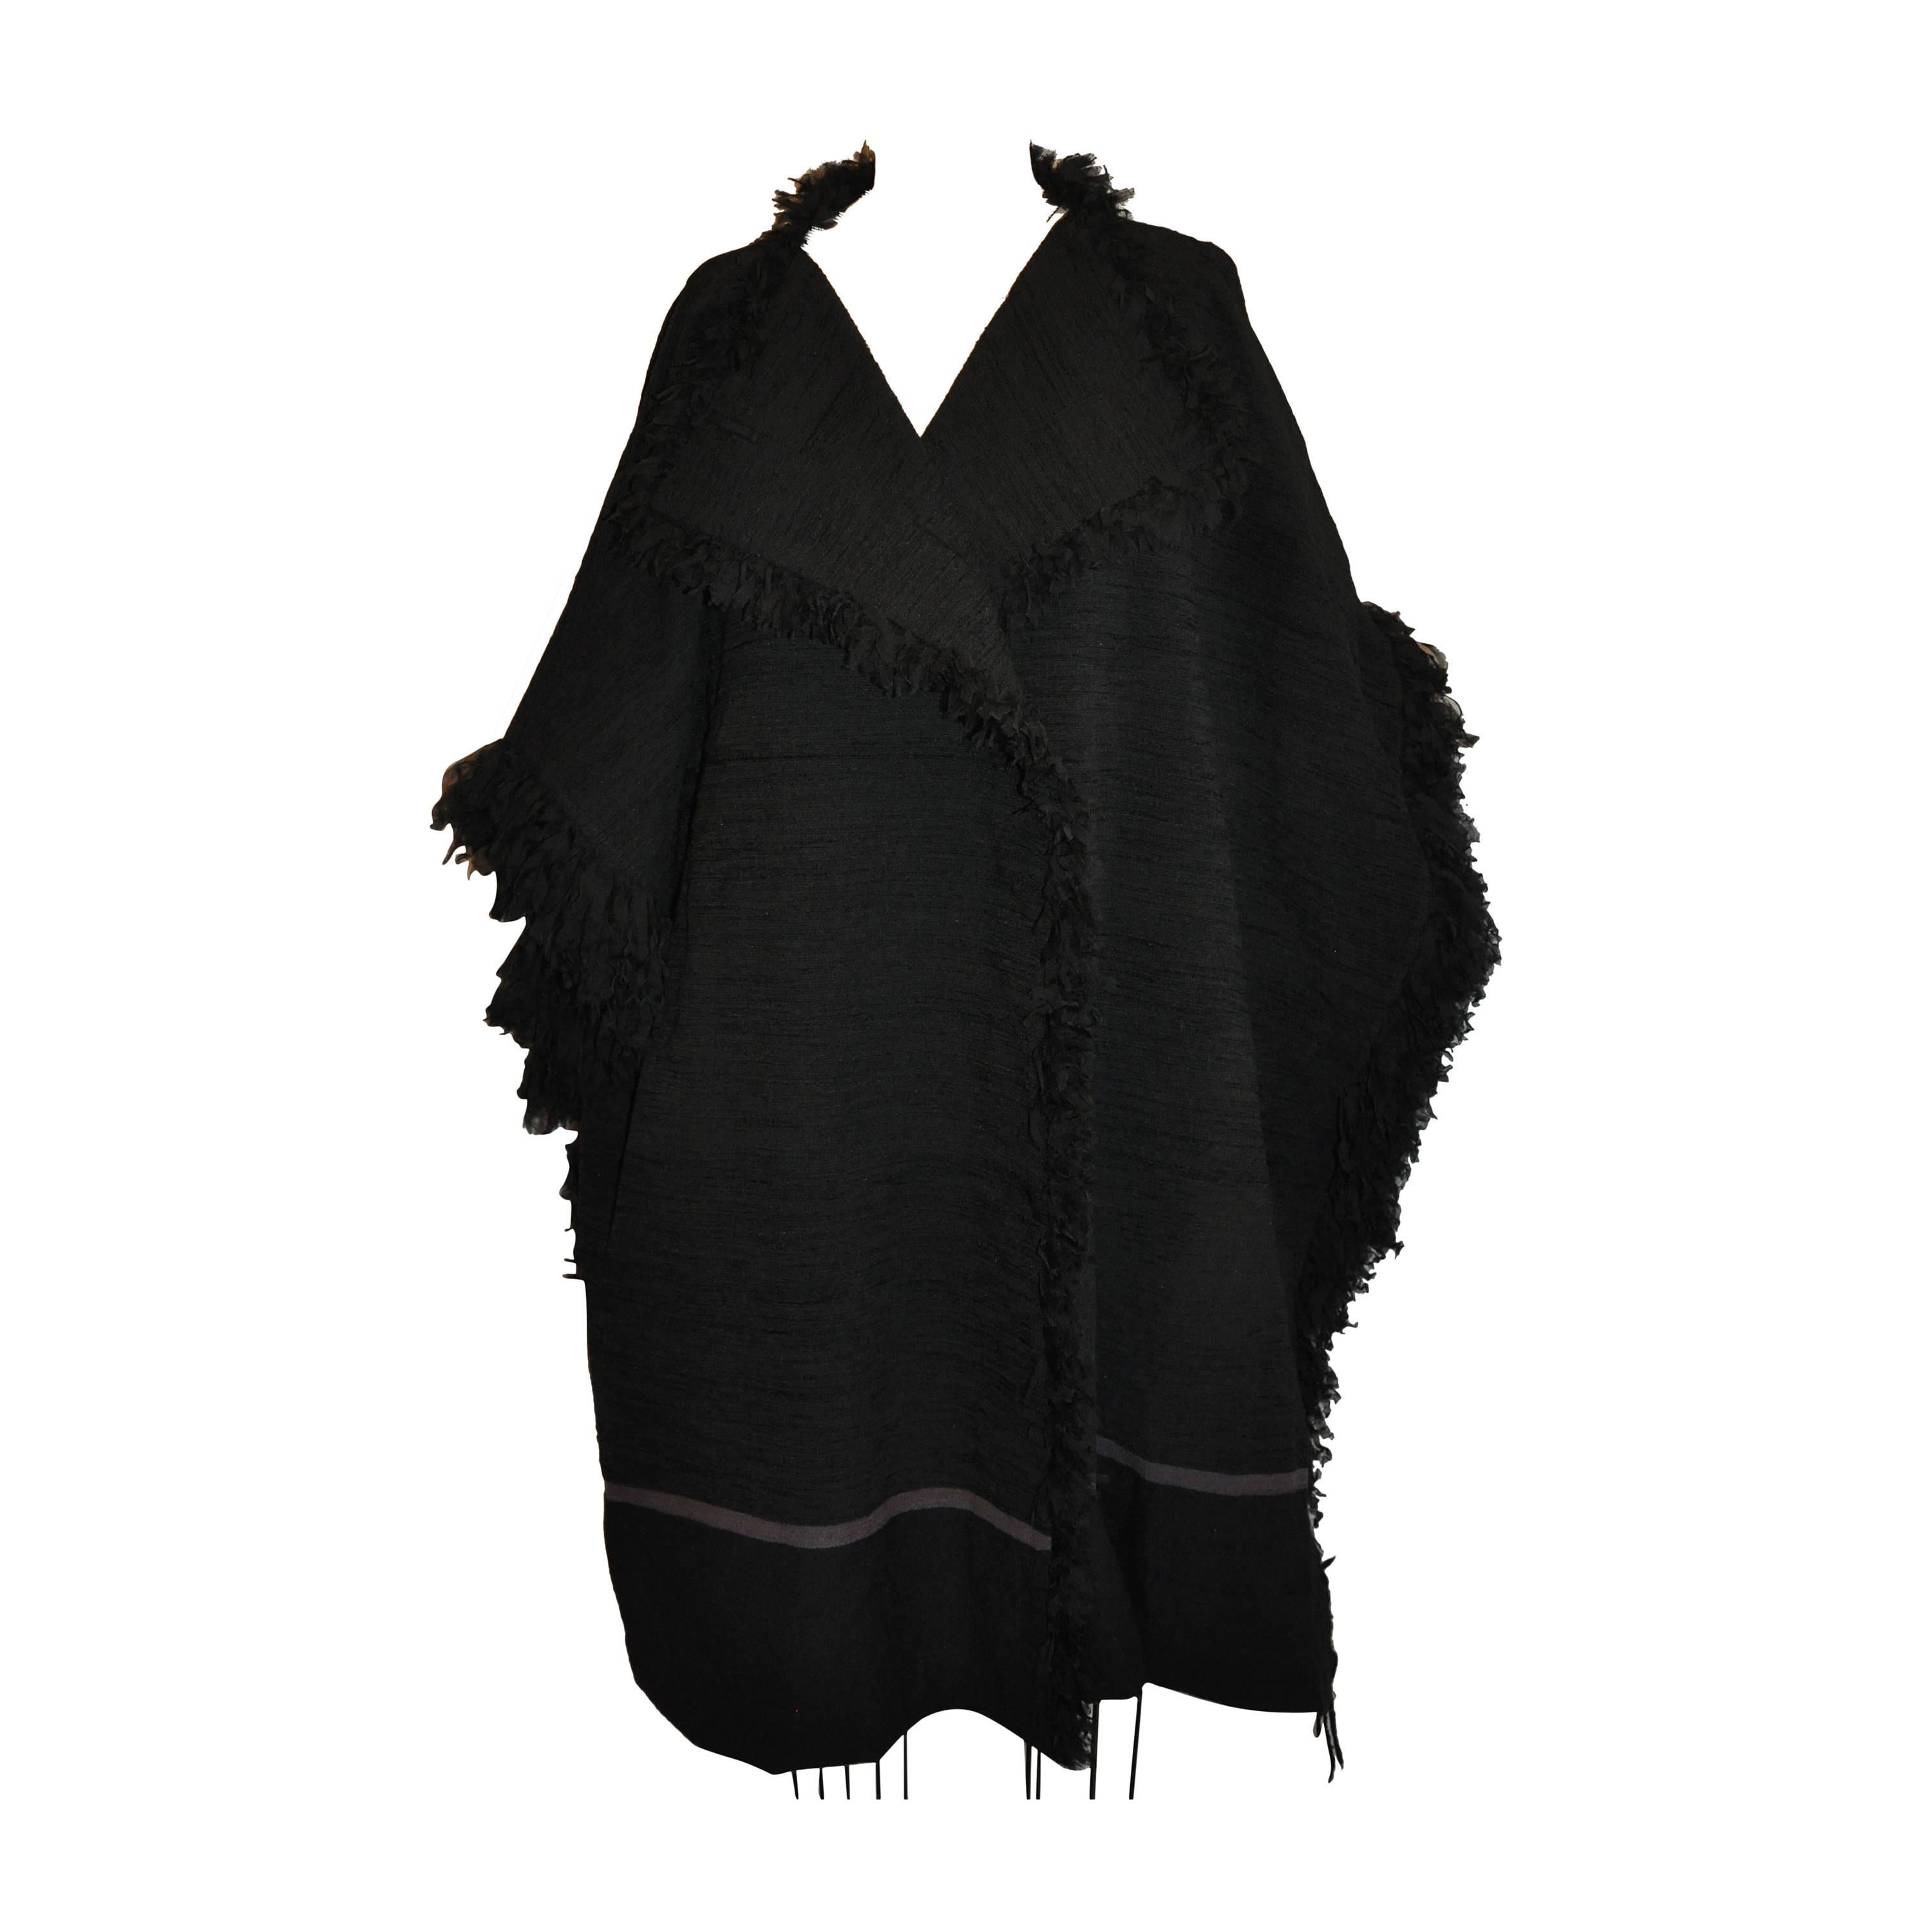 Issey Miyake's Heart Haat Black Shawl/Cape Accented with Fringe at ...